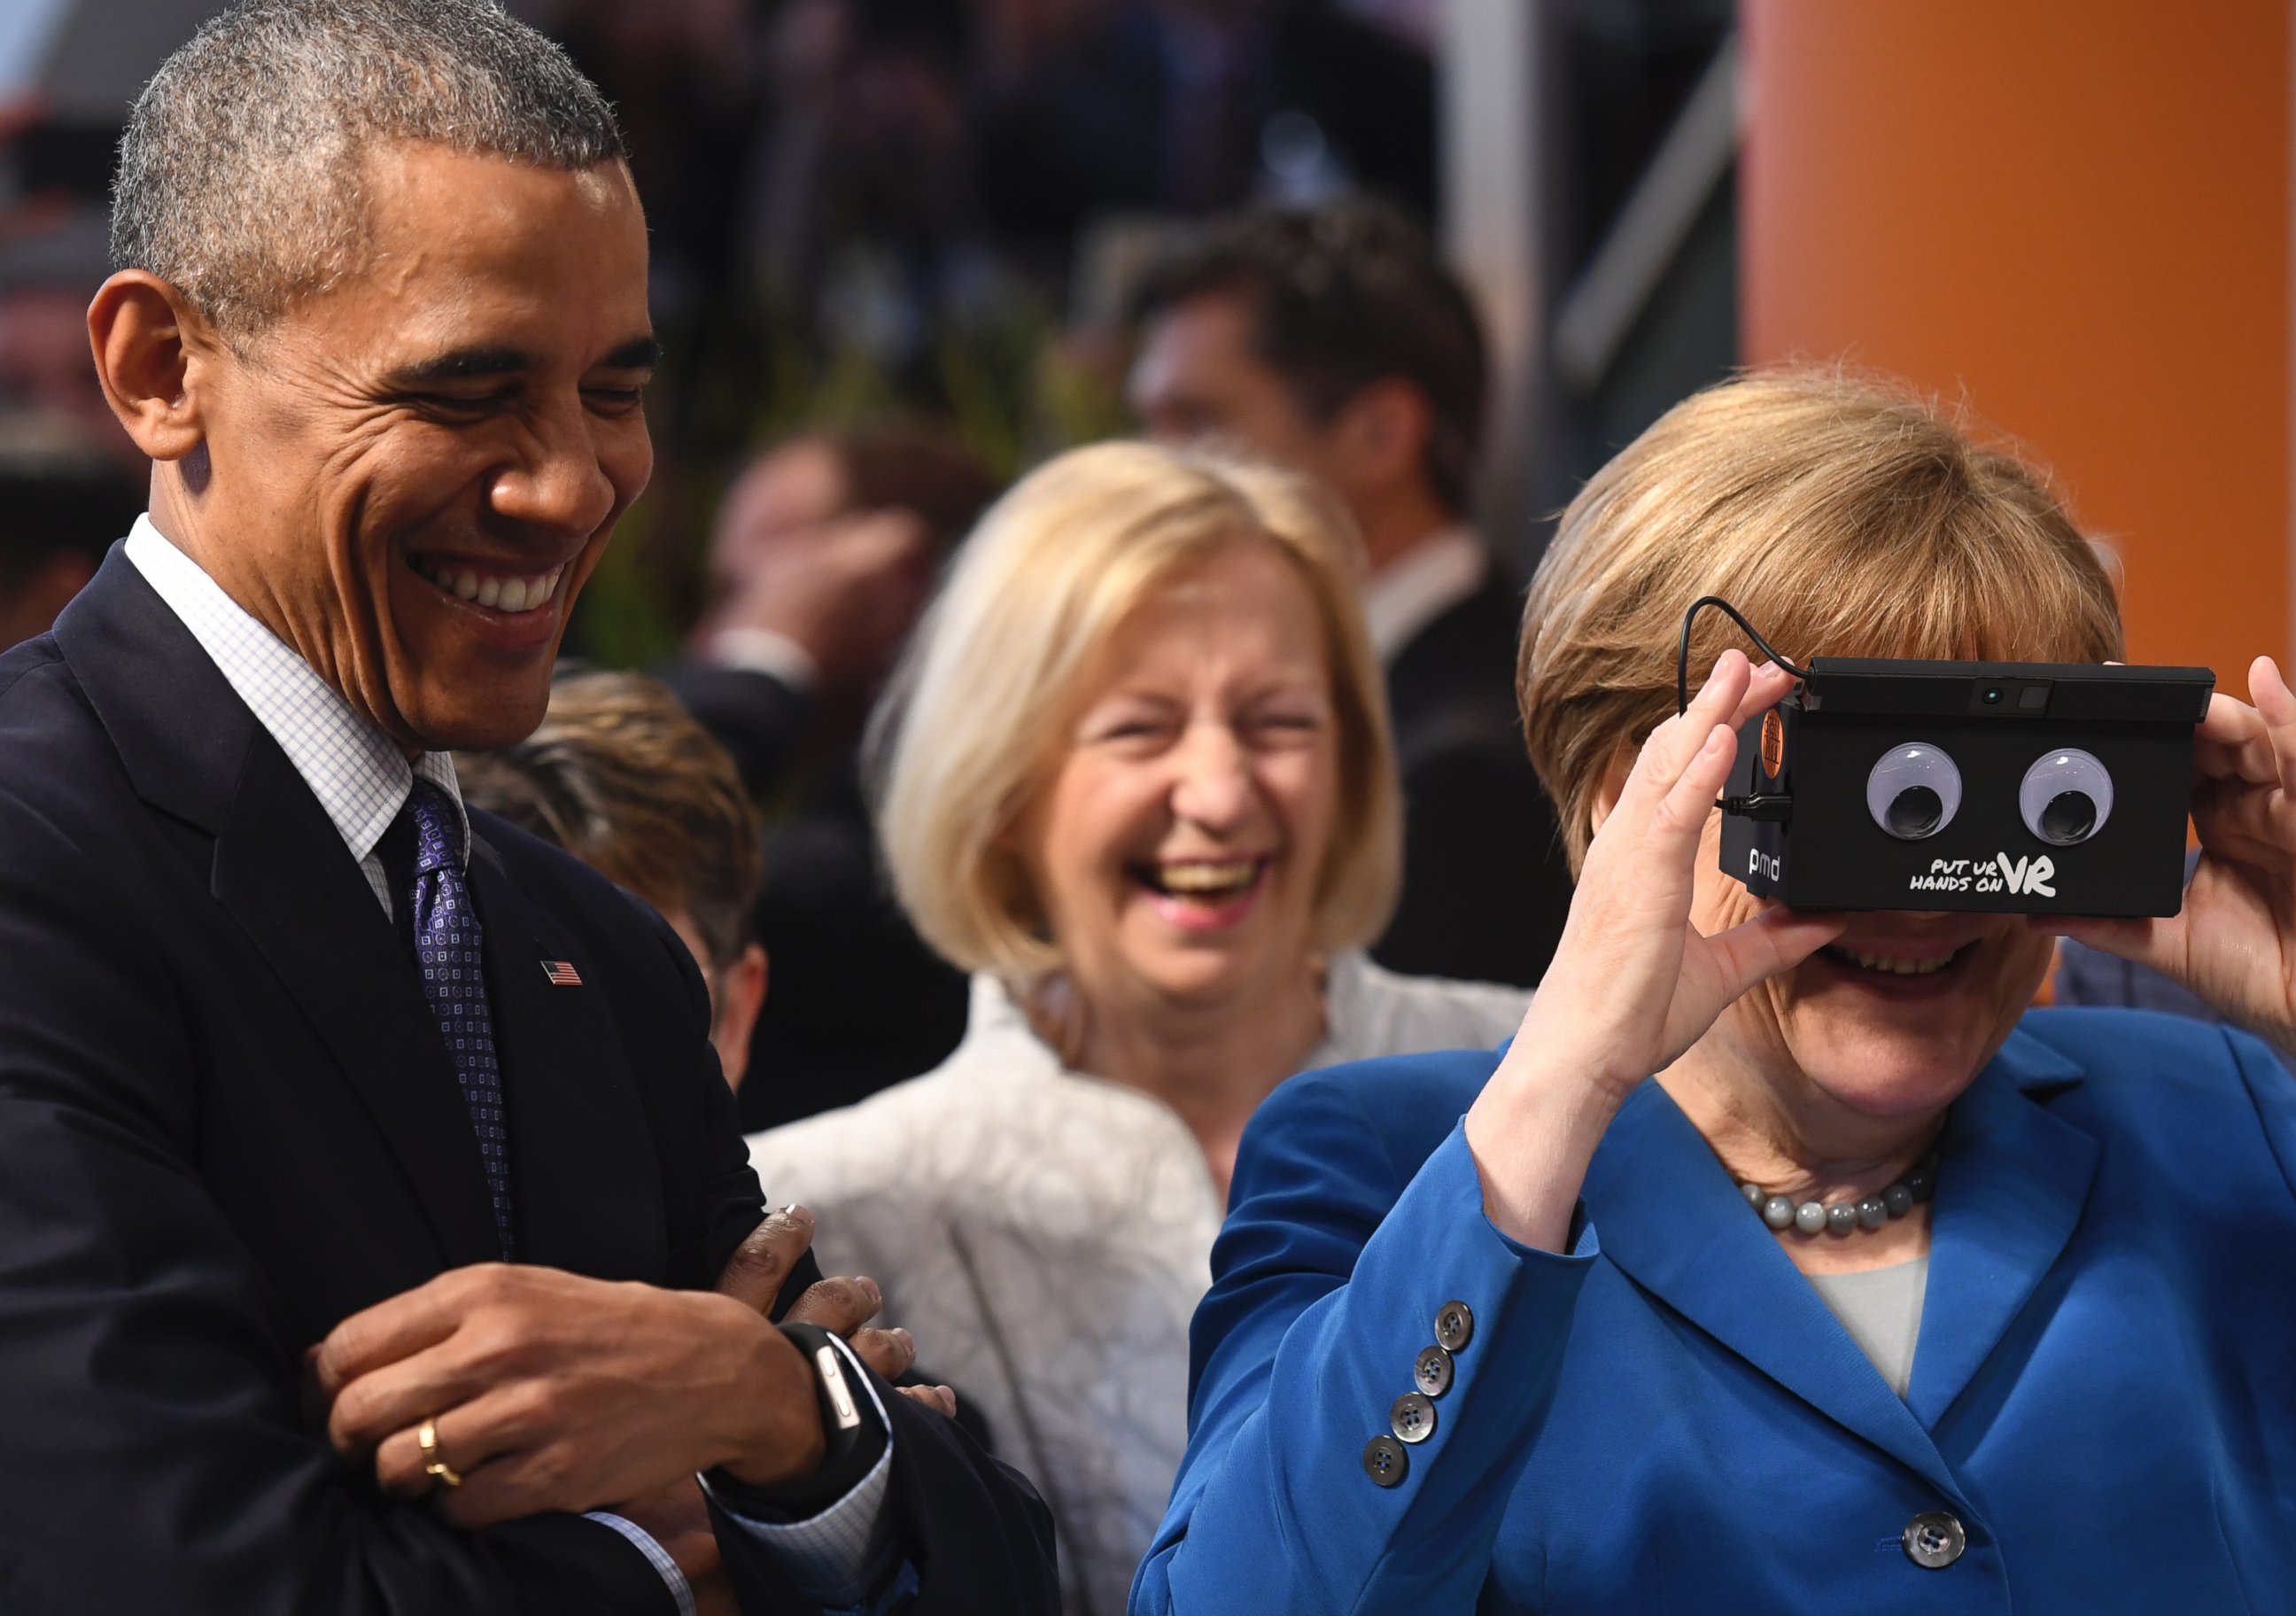 PHOTO:President Barack Obama and German Chancellor Angela Merkel visit the ifm electronics stand at the Hannover Messe industrial trade fair, April 25, 2016, in Hanover, Germany.  